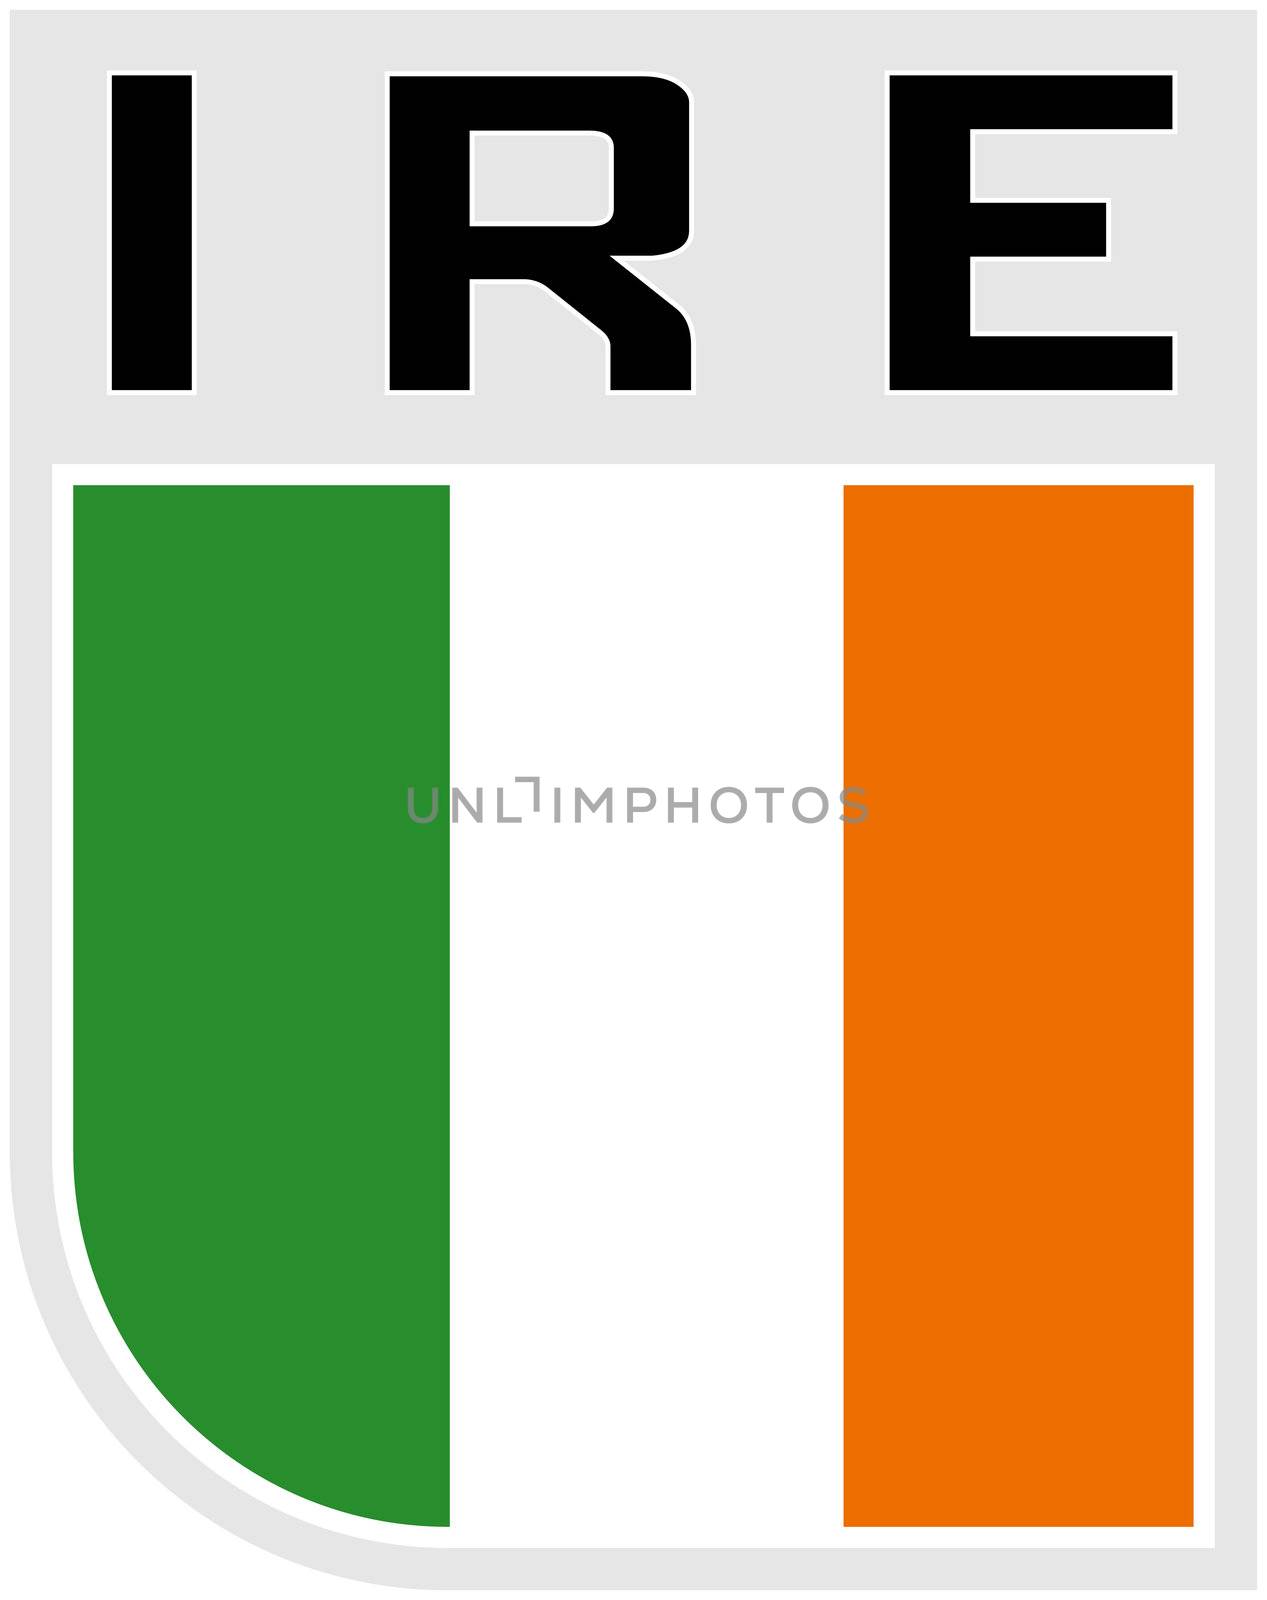 Illustration an icon of the Flag of Ireland